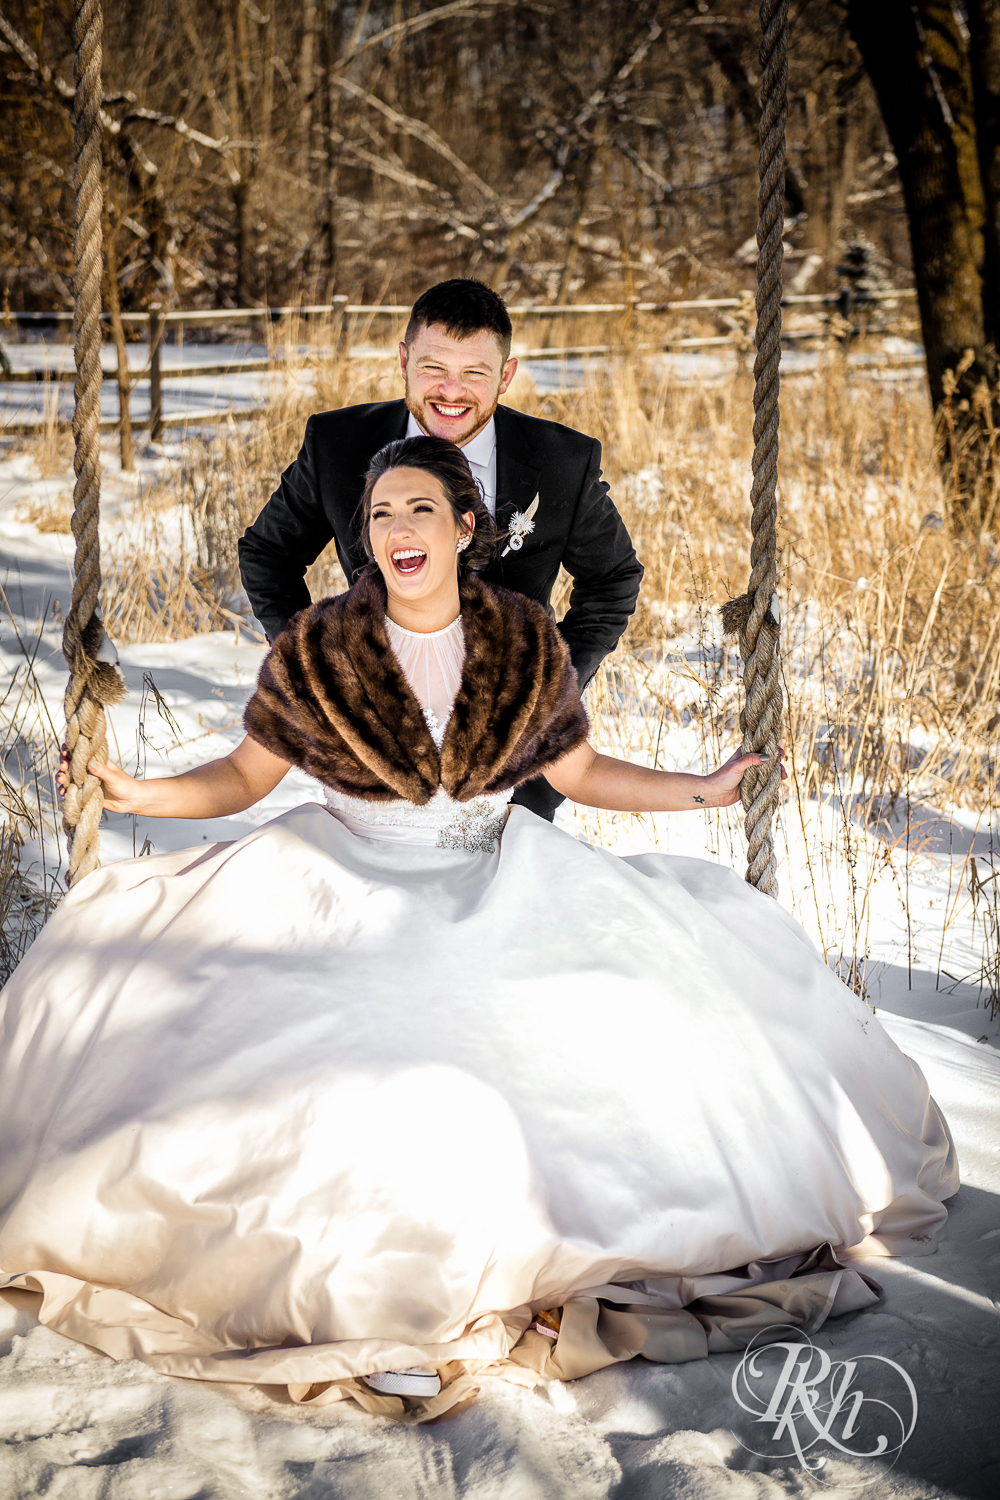 Bride and groom laugh in the snow during winter wedding at Creekside Farm in Rush City, Minnesota.